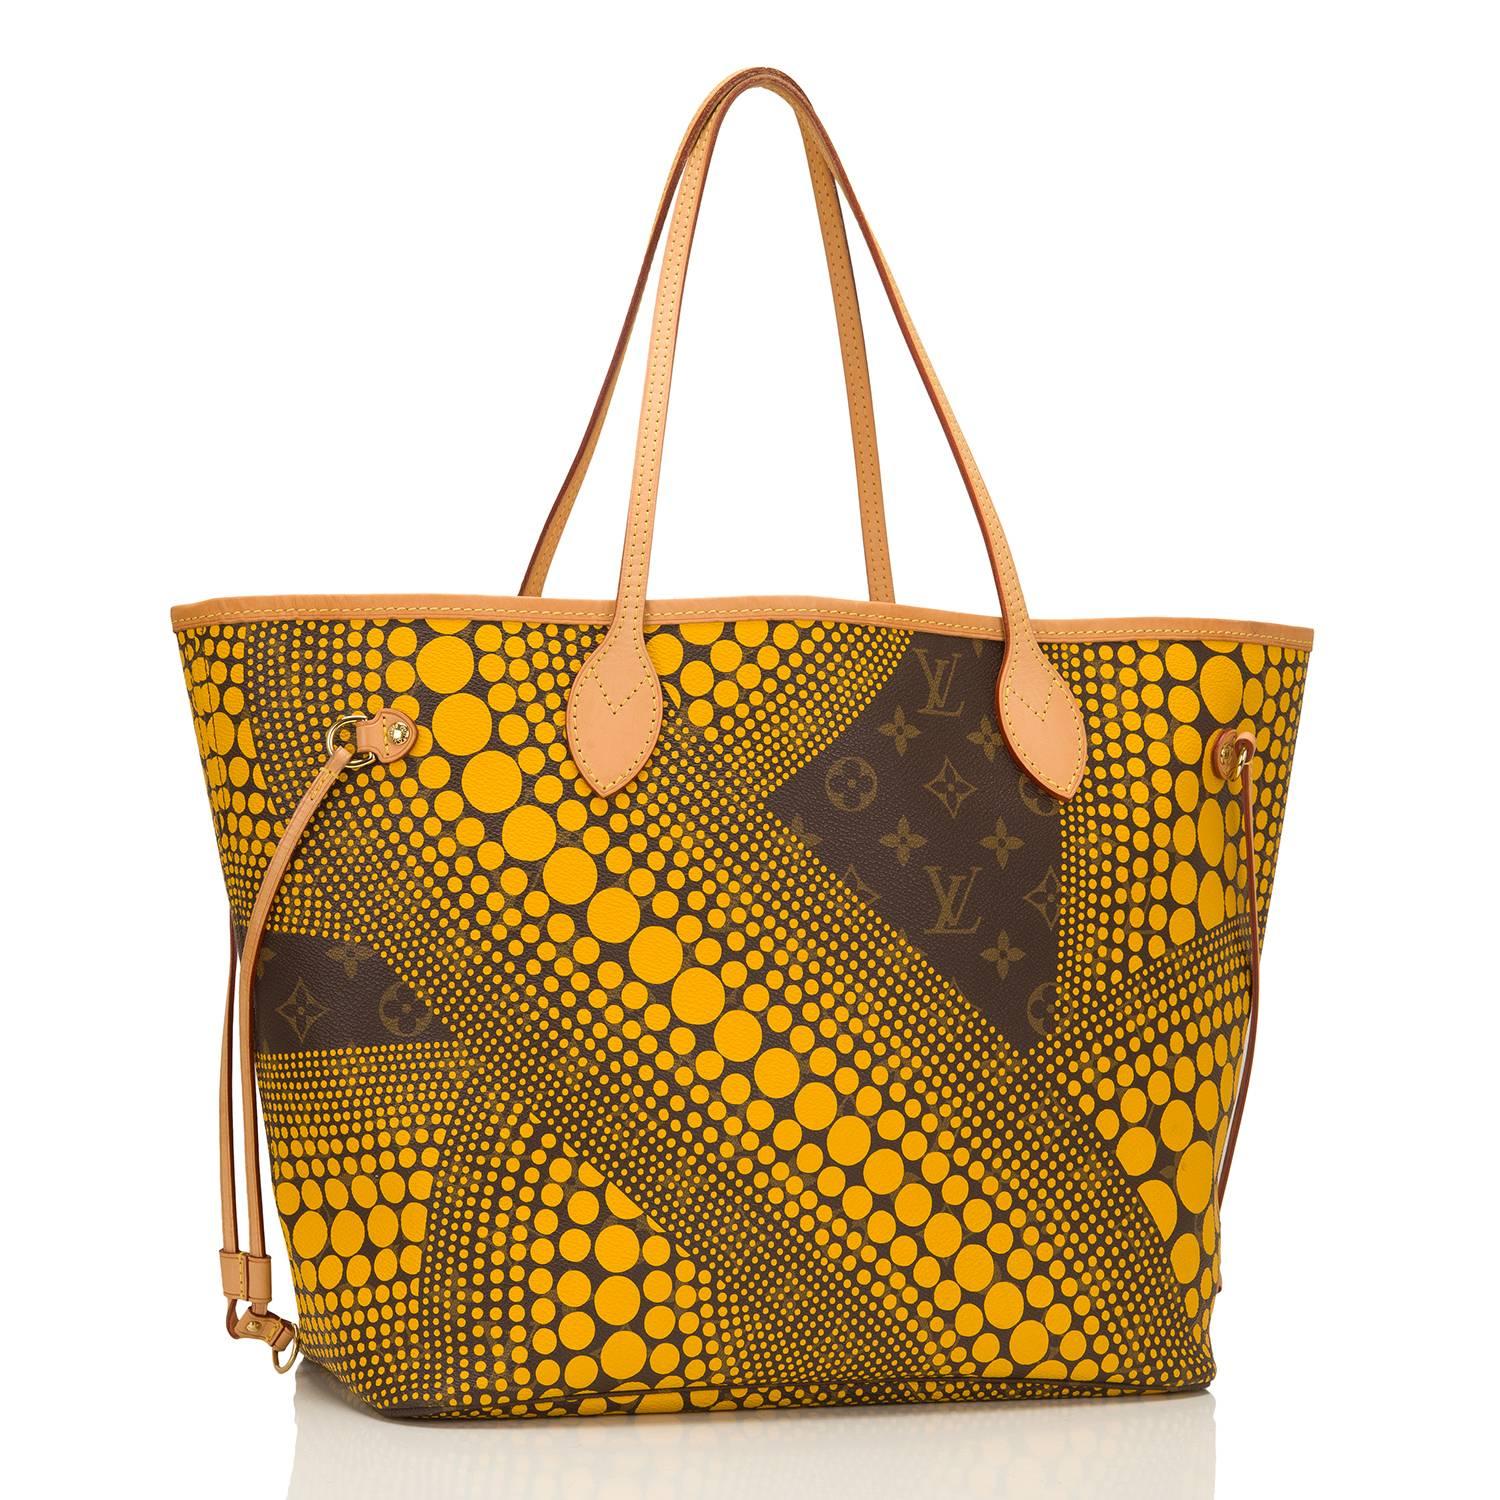 Louis Vuitton Yellow Monogram Waves Neverfull MM tote designed by Yayoi Kusama of coated canvas.

This limited edition Neverfull has polished brass hardware, yellow contrast stitching, a removable luggage tag, a hidden top hook closure, double